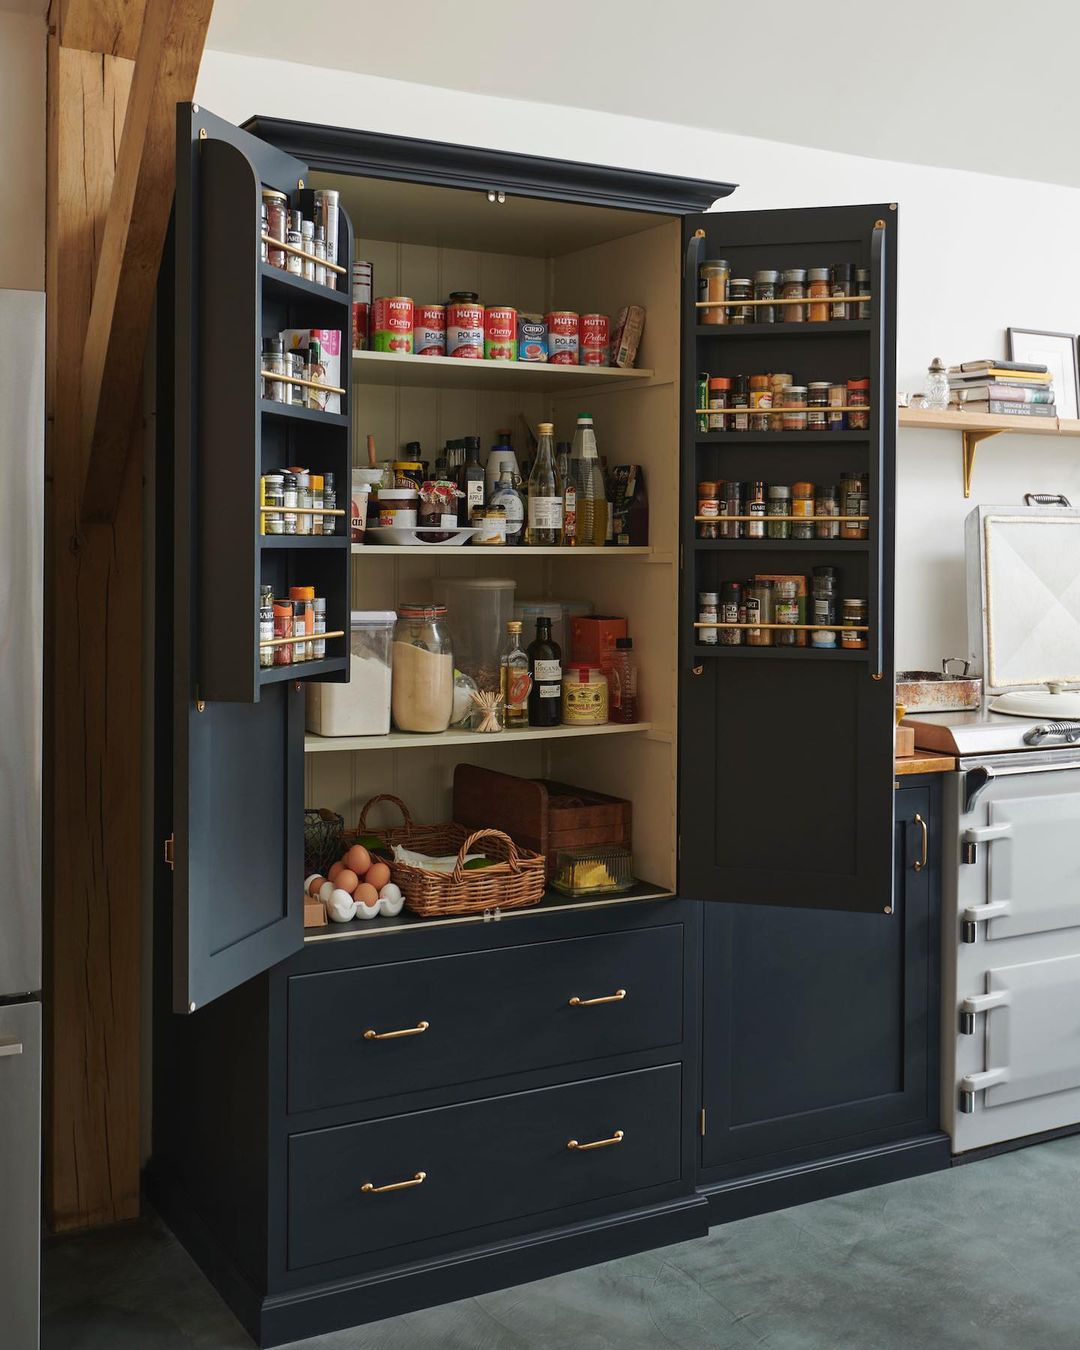 A kitchen with a spacious pantry is essential for keeping things organized.